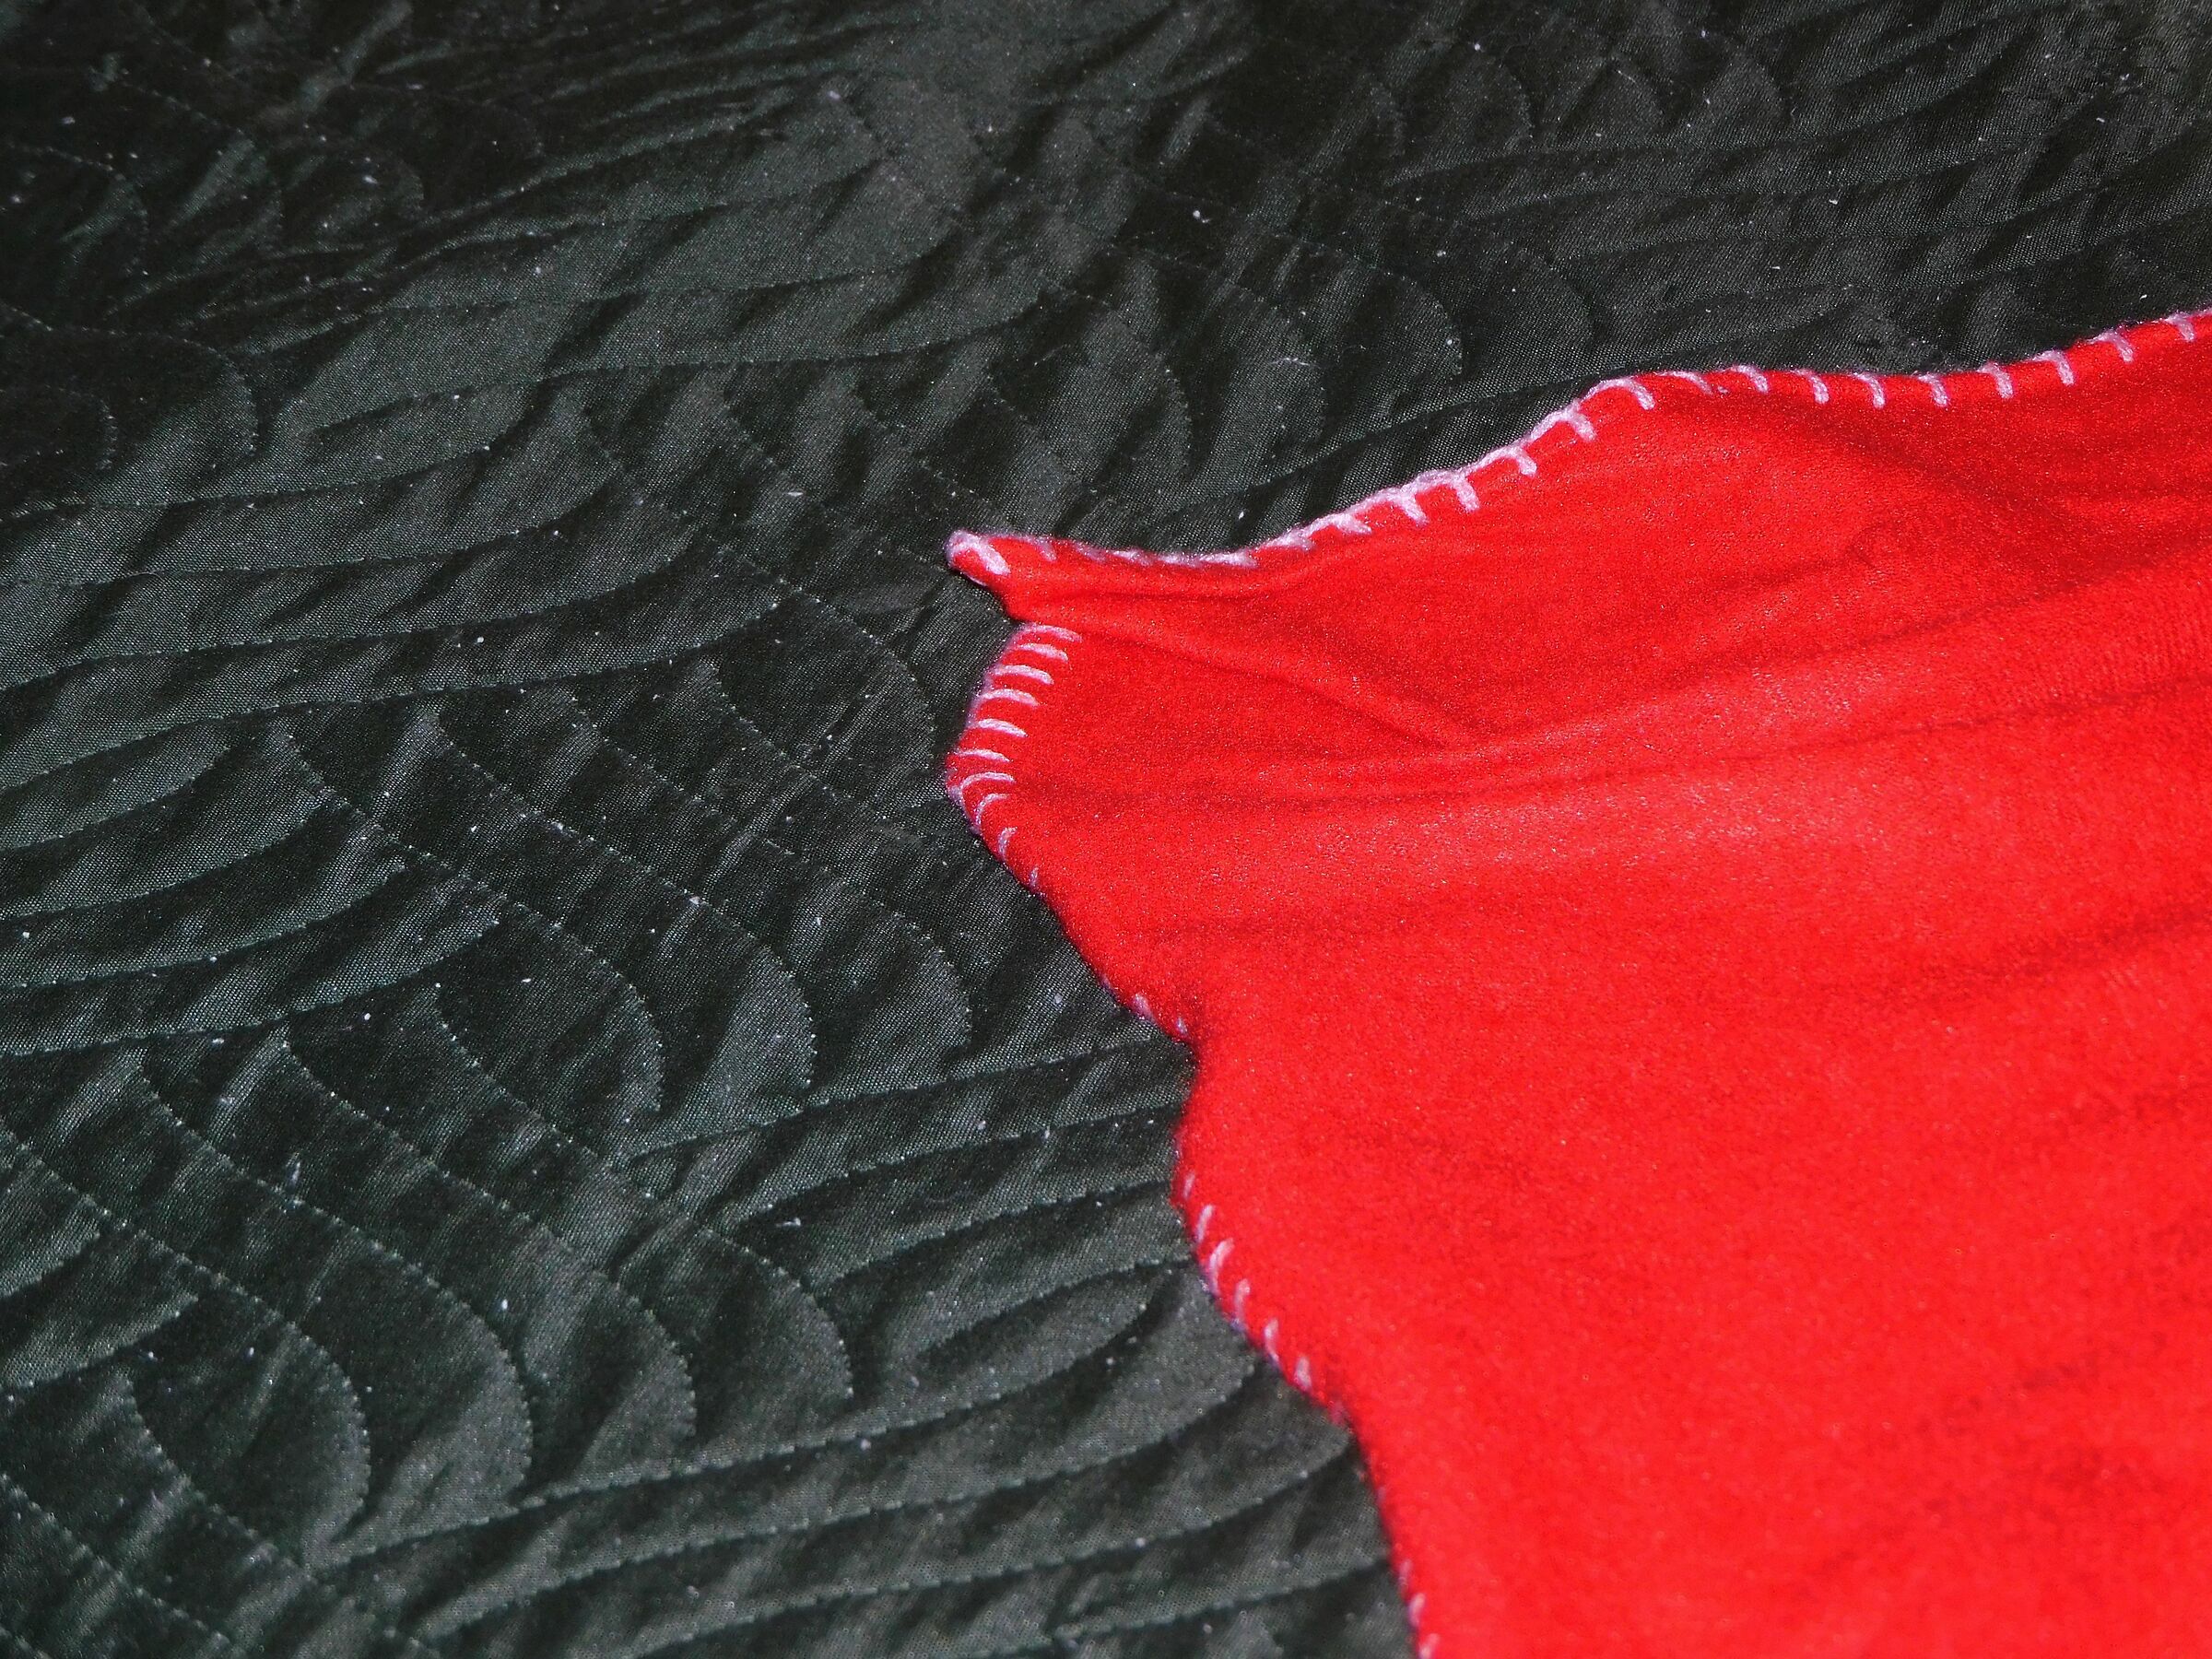 The red blanket...